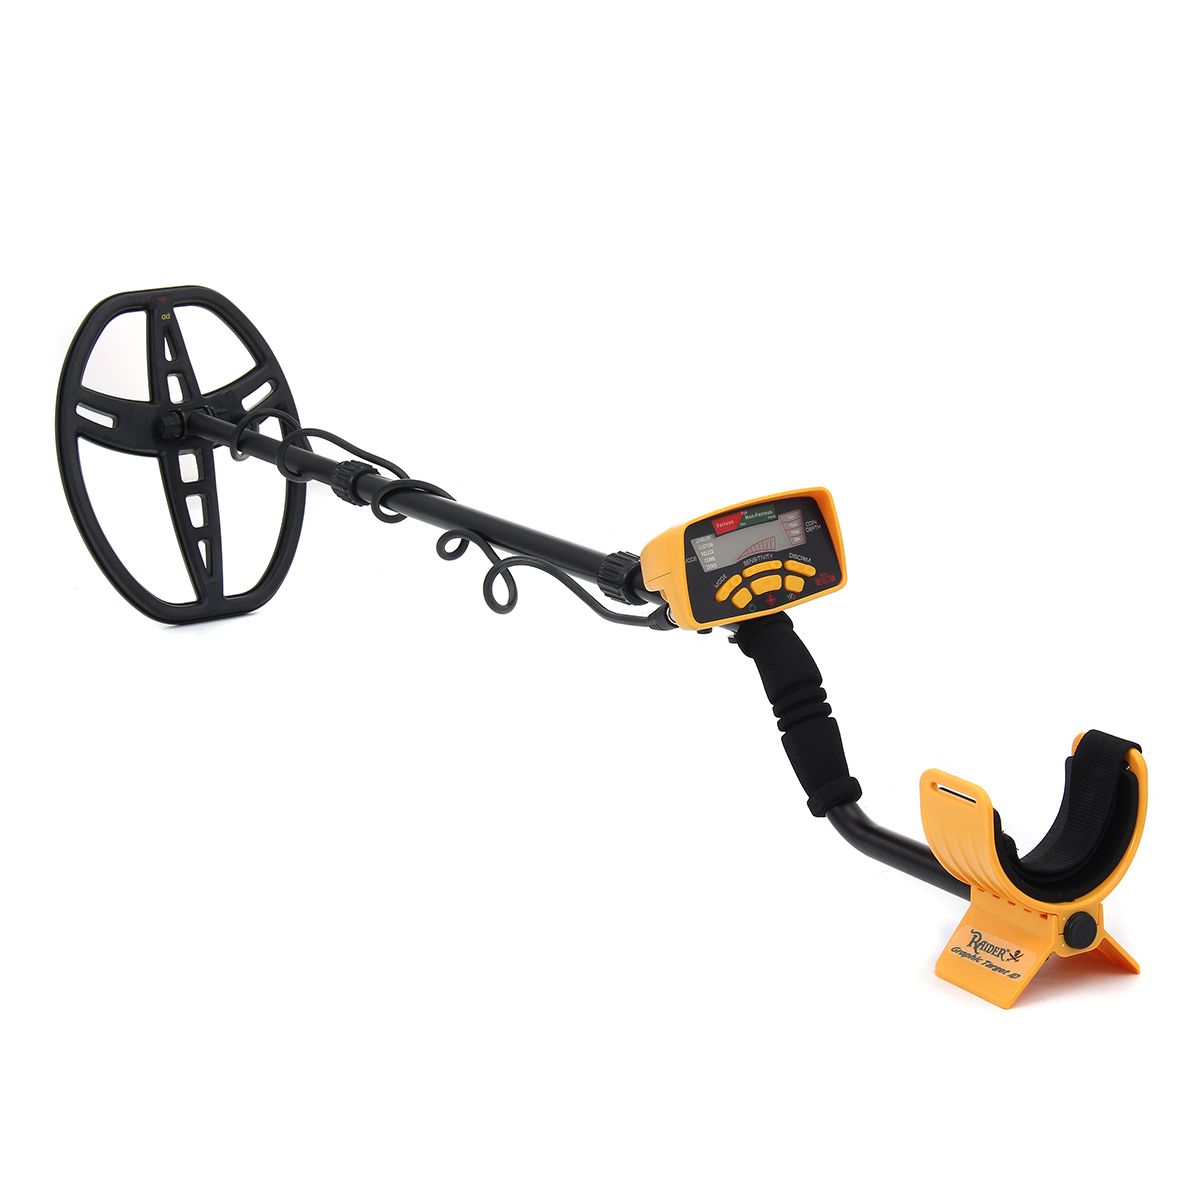 MD-6350-Underground-Metal-Detector-With-LCD-Display-Gold-Jewelry-Hunter-Portable-1752614